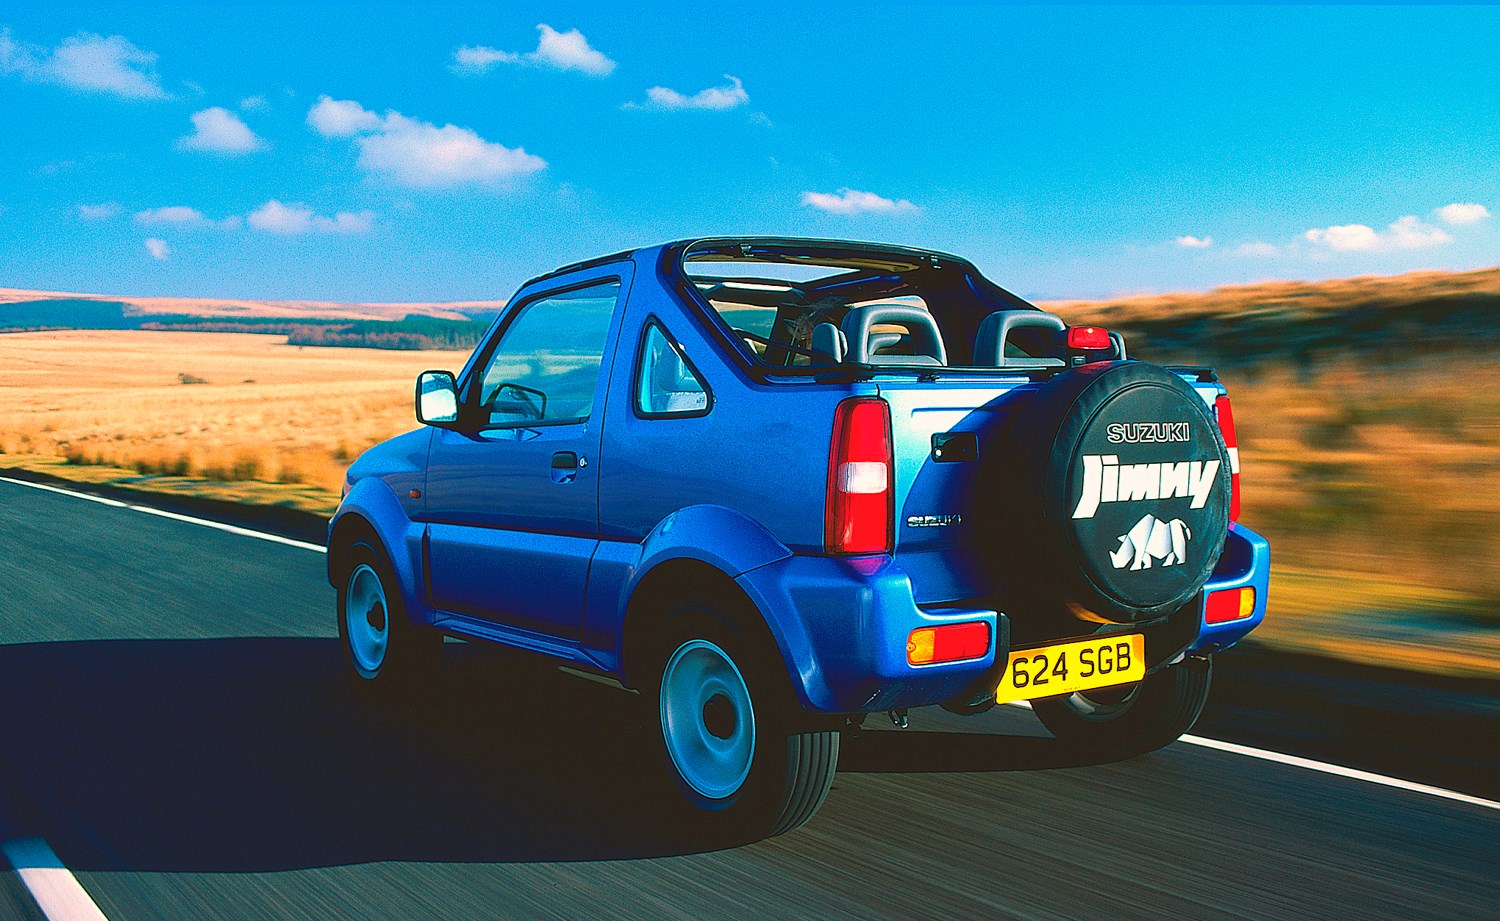 Used Suzuki Jimny Soft top 2000 2005 Review Parkers